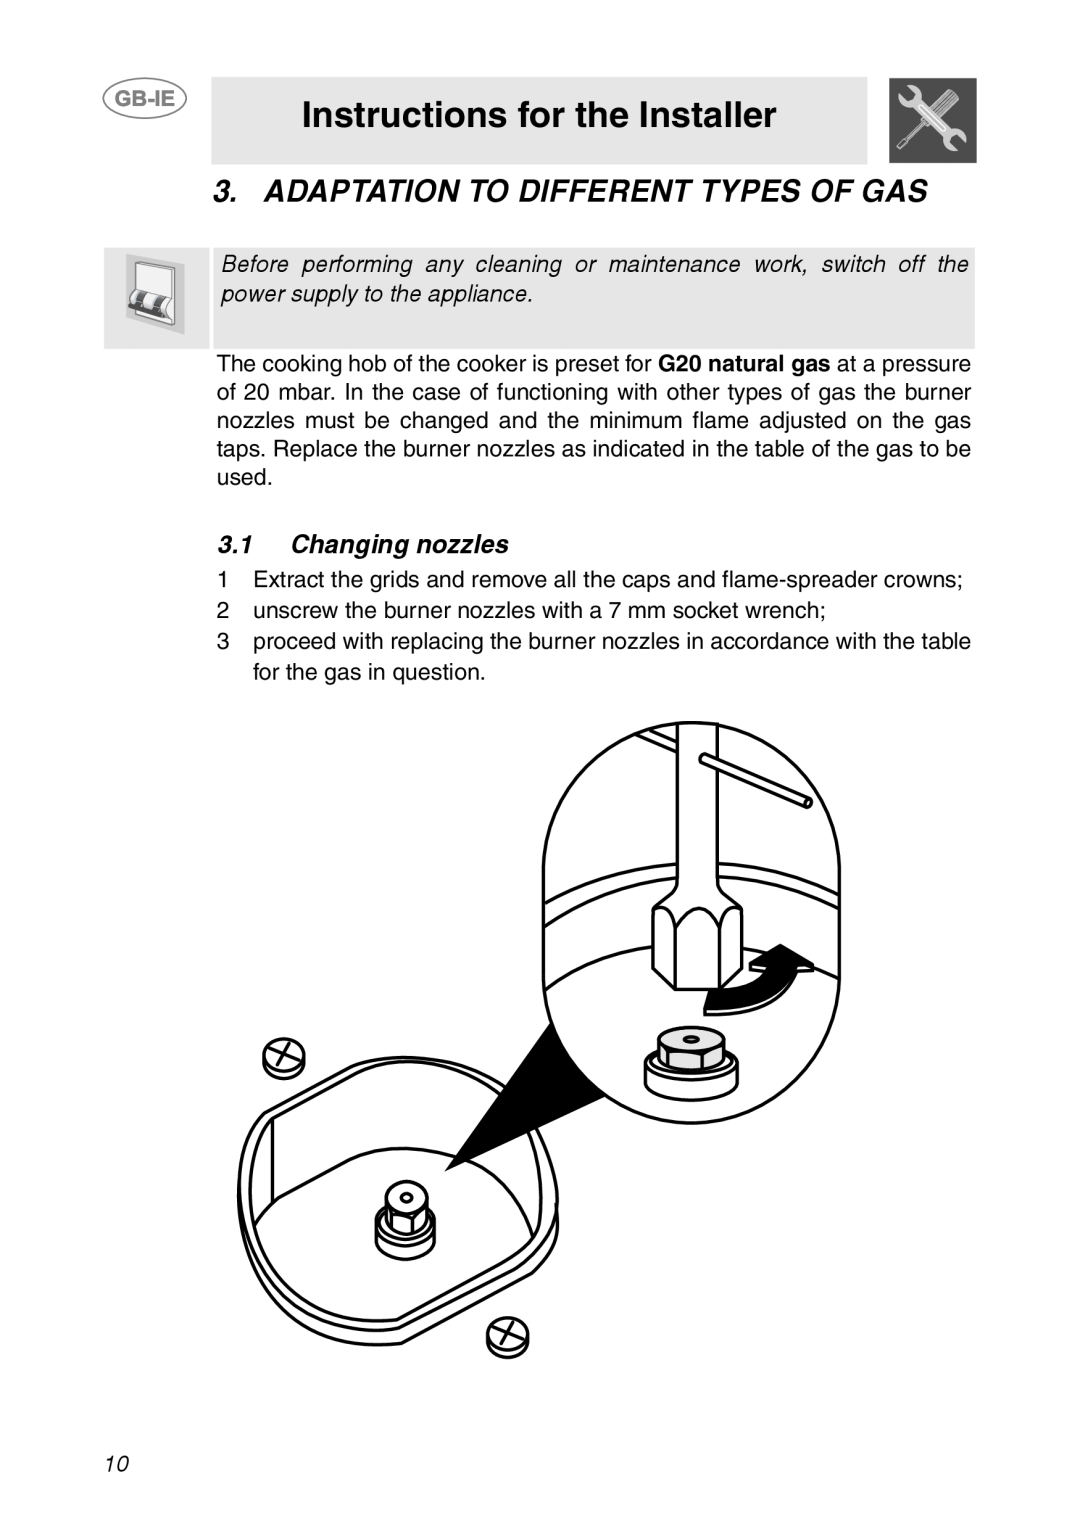 Smeg CS150SA manual Adaptation To Different Types Of Gas, Instructions for the Installer, 3.1Changing nozzles 